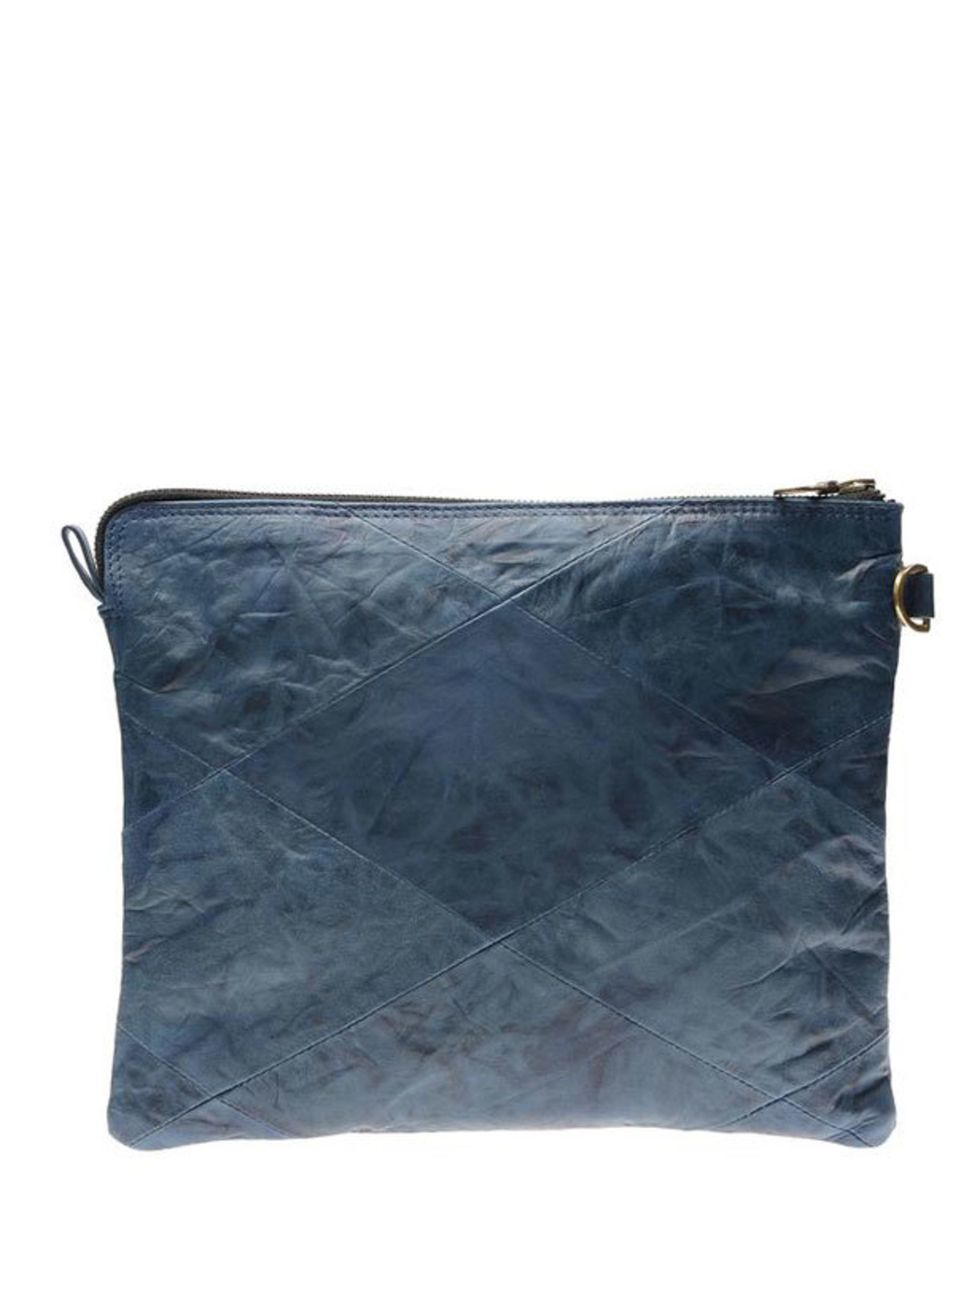 <p>Jas MB leather iPad pouch, £165, at <a href="http://www.brownsfashion.com/Product/IPC_leather_iPad_pouch/Product.aspx?p=3182780">Browns</a></p>